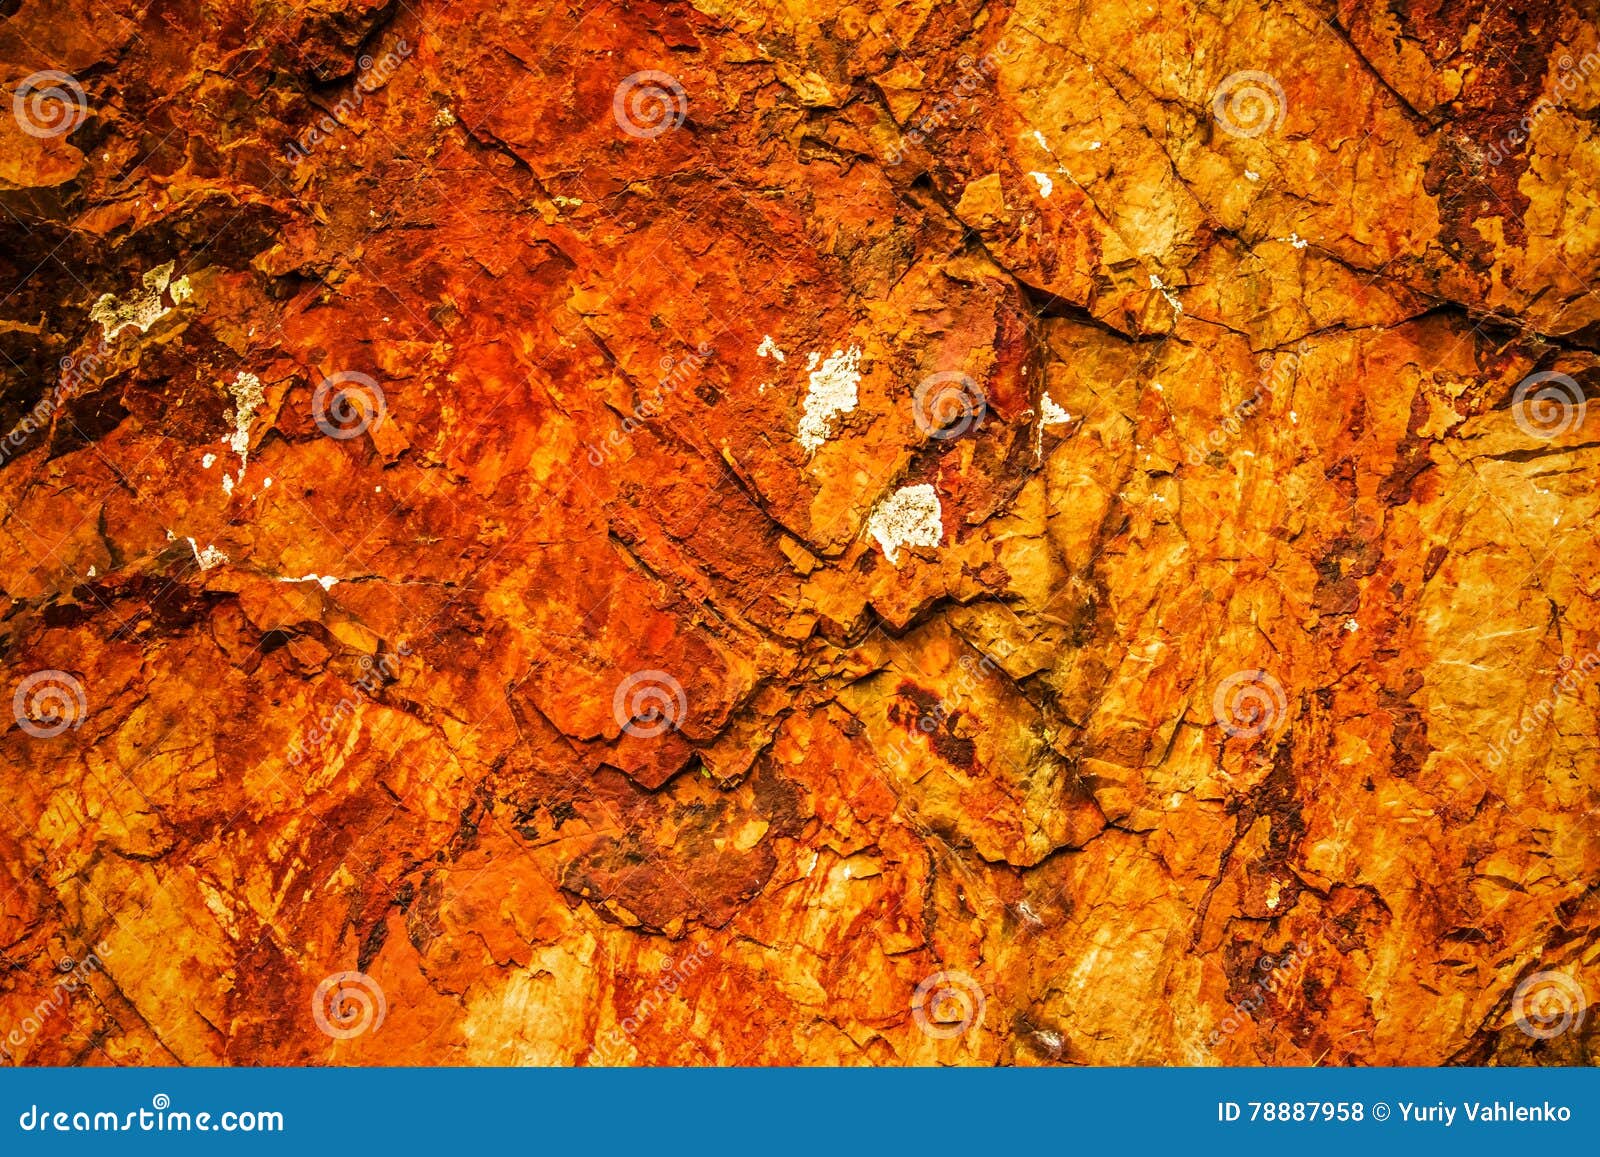 Red Stone Rock Background Contrast Abstract Wallpaper Stock Photo Image Of Rocks Design